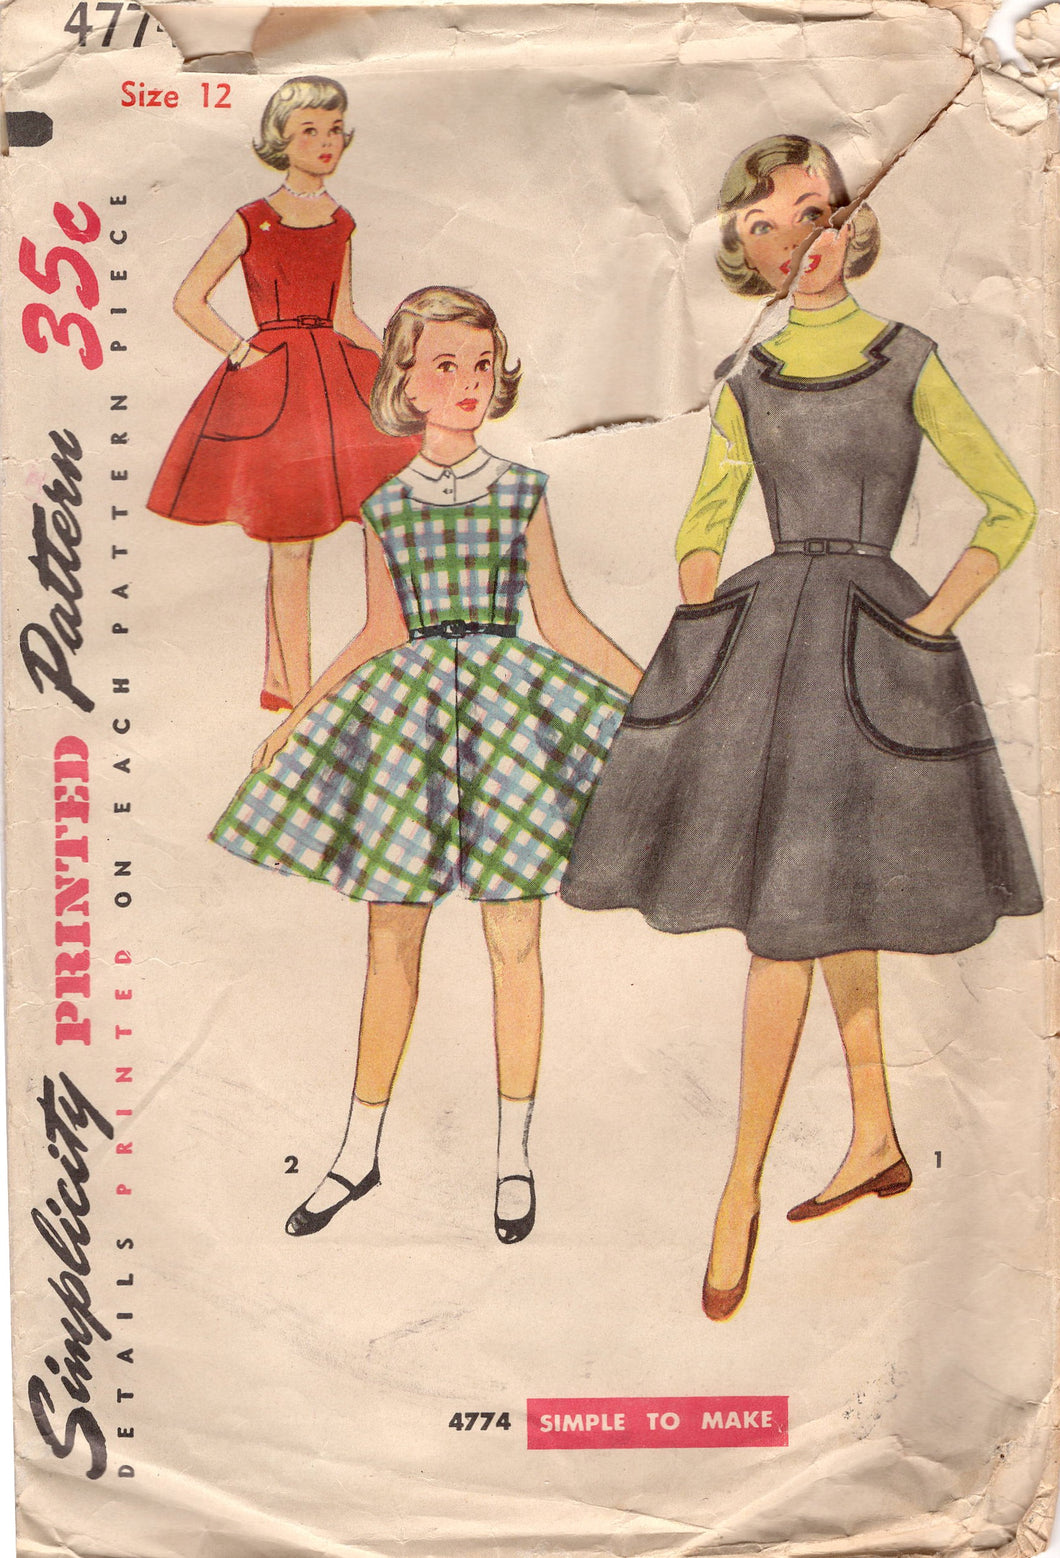 1950's Simplicity Child's One Piece Dress Pattern with Jagged Neckline - Mother/Daughter - Chest 30